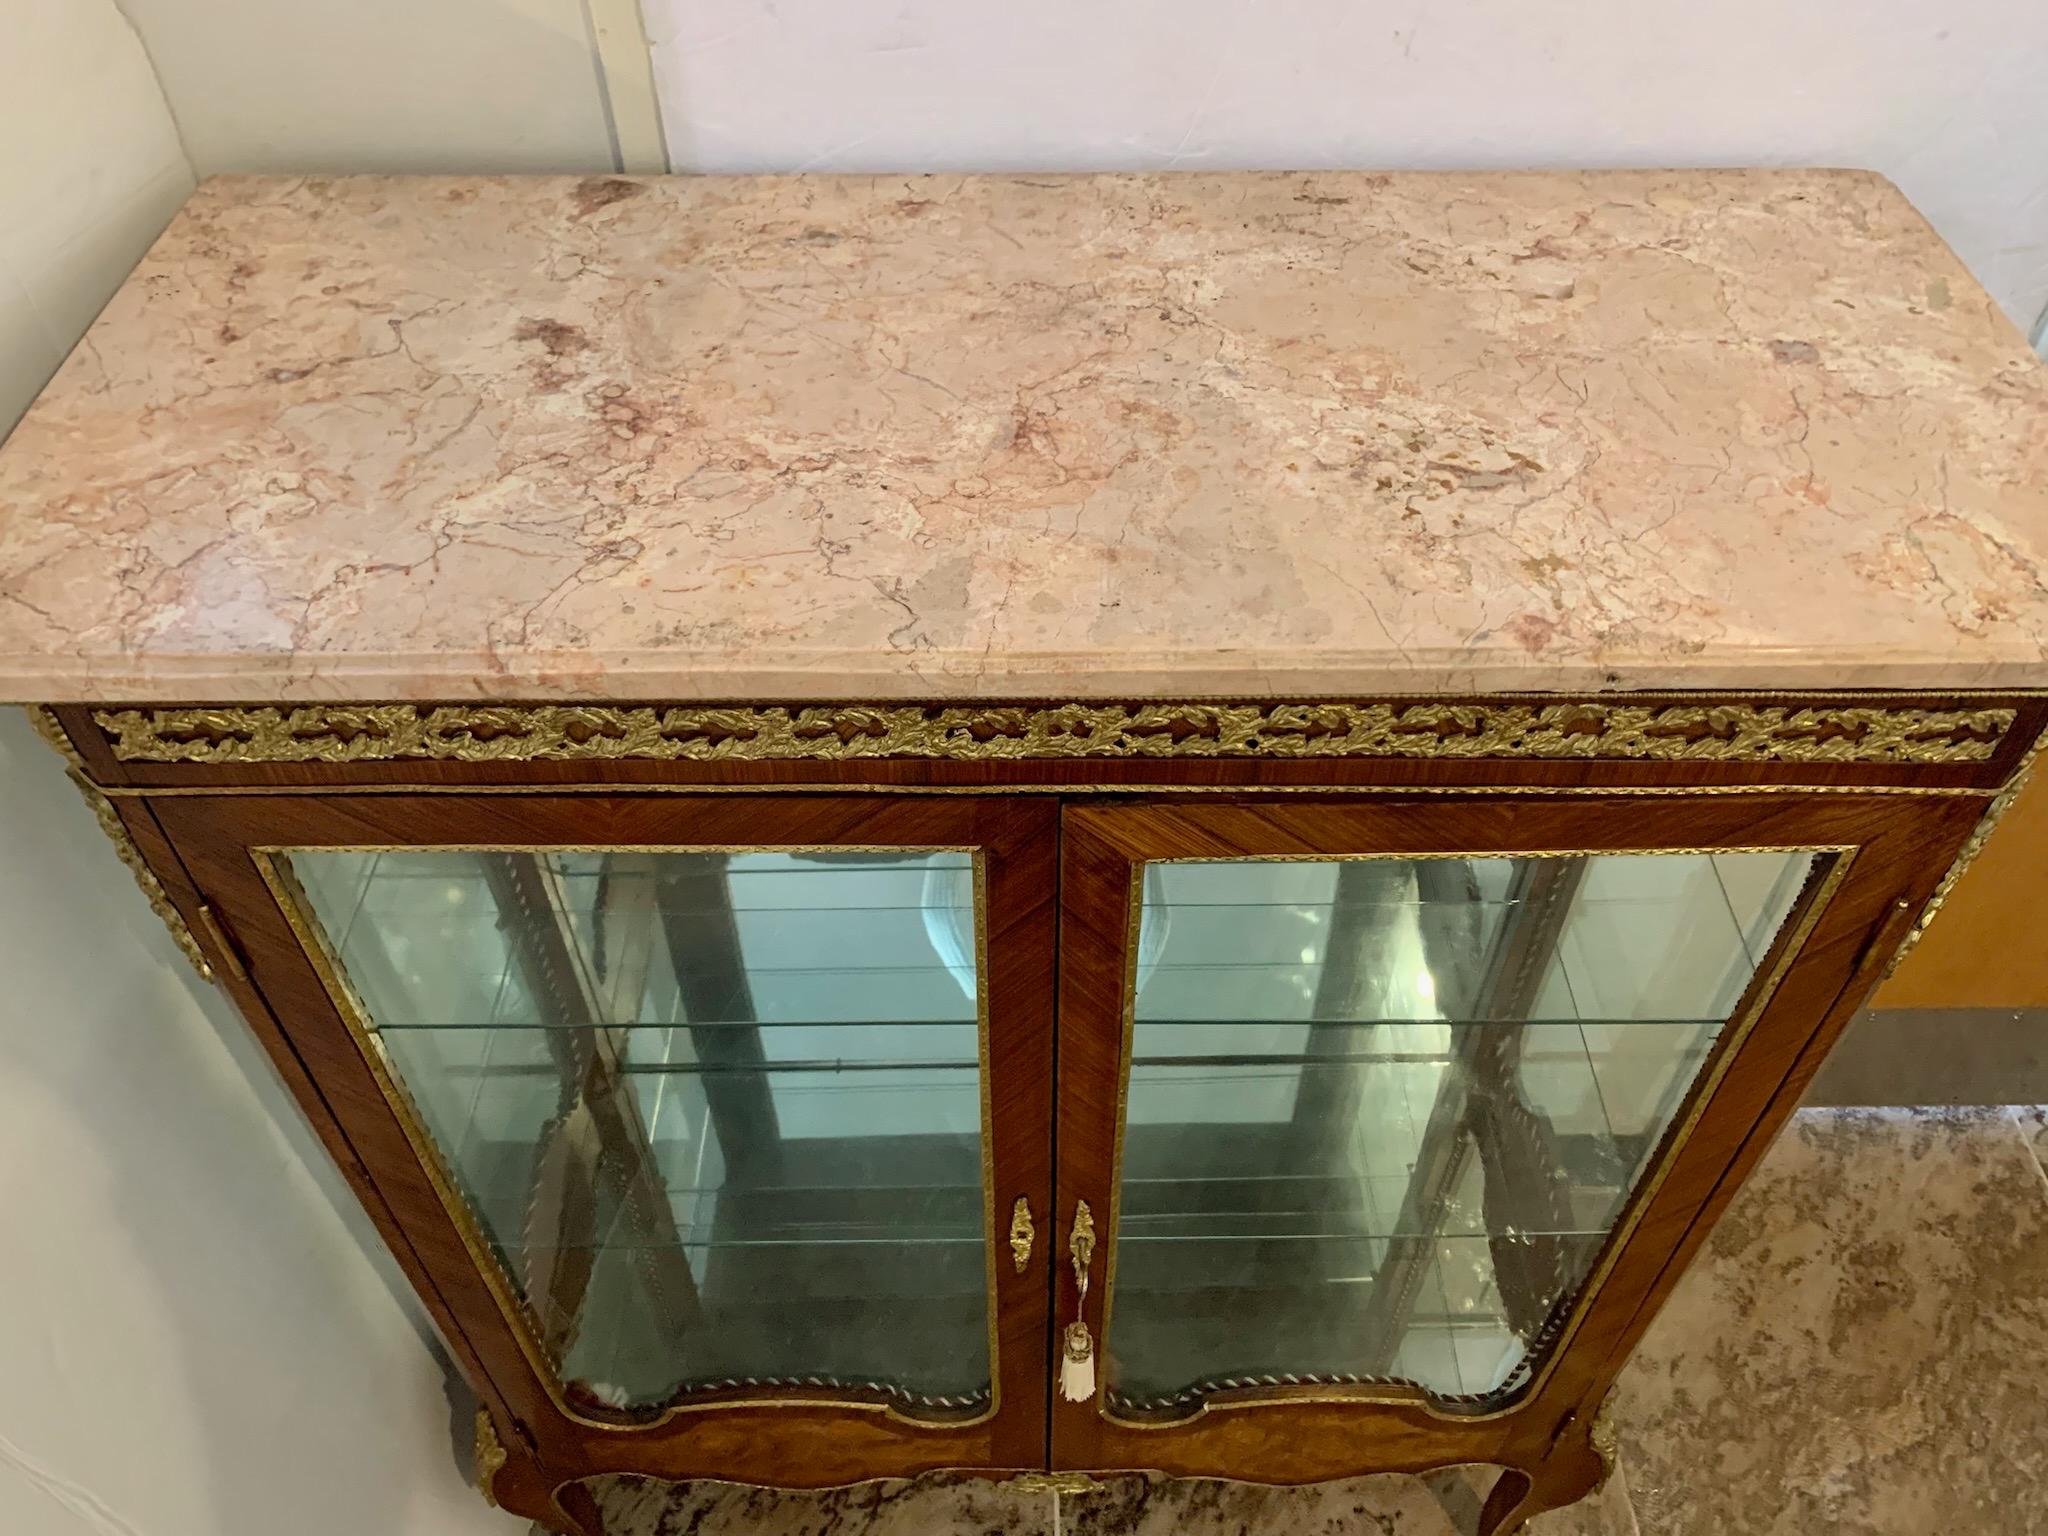 Exquisite French vitrine has Louis XVI styling with bronze ormolu mounts and marble top. Twodoors and both sides have glass. The interior has glass shelves in front of a mirrored back.